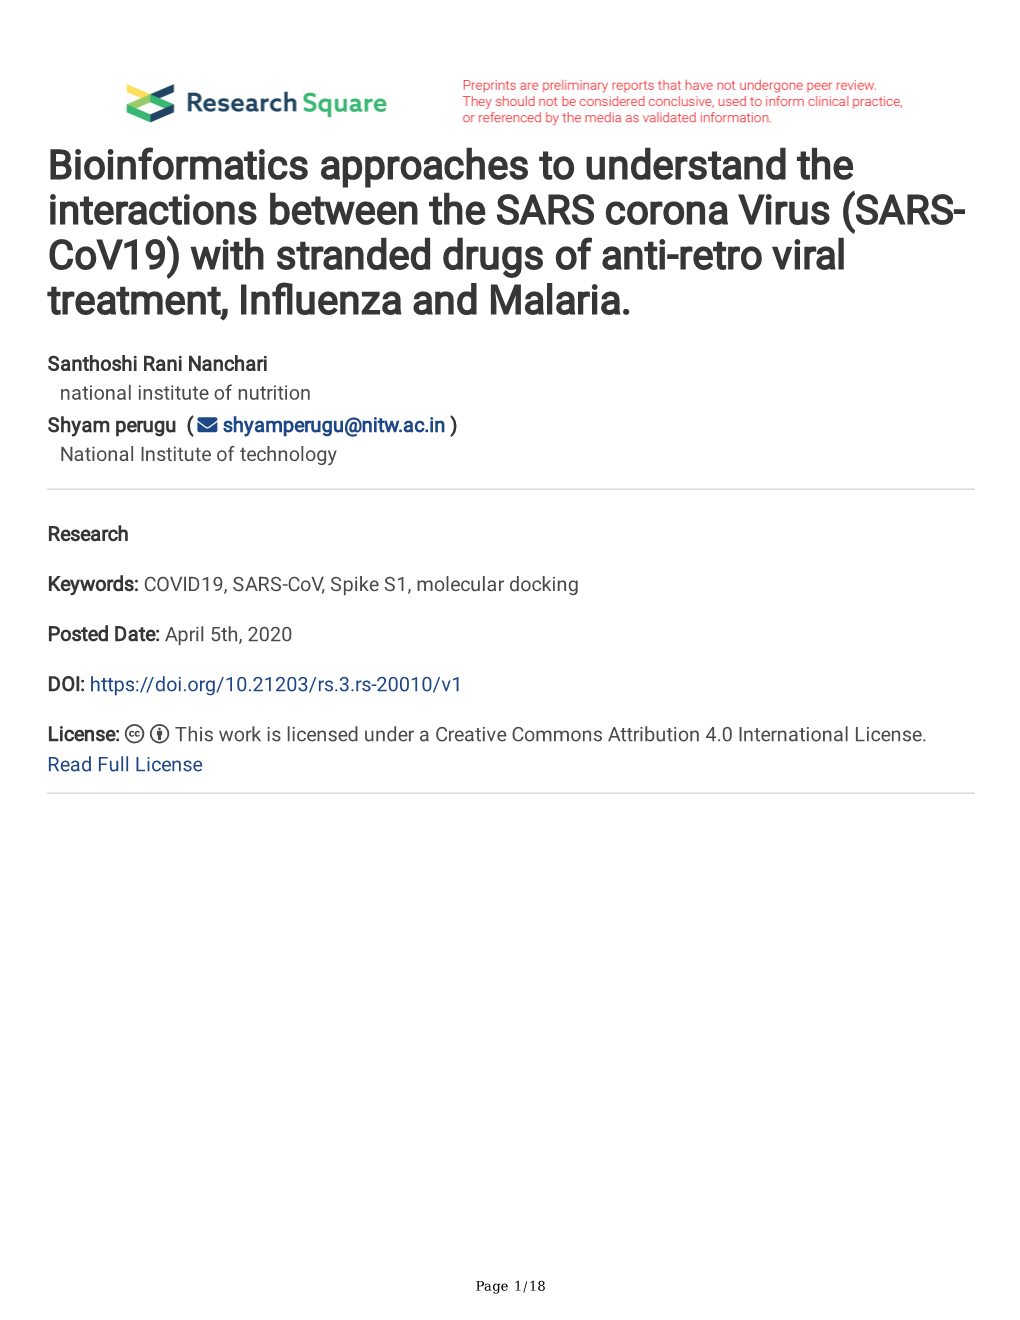 (SARS- Cov19) with Stranded Drugs of Anti-Retro Viral Treatment, Infuenza and Malaria